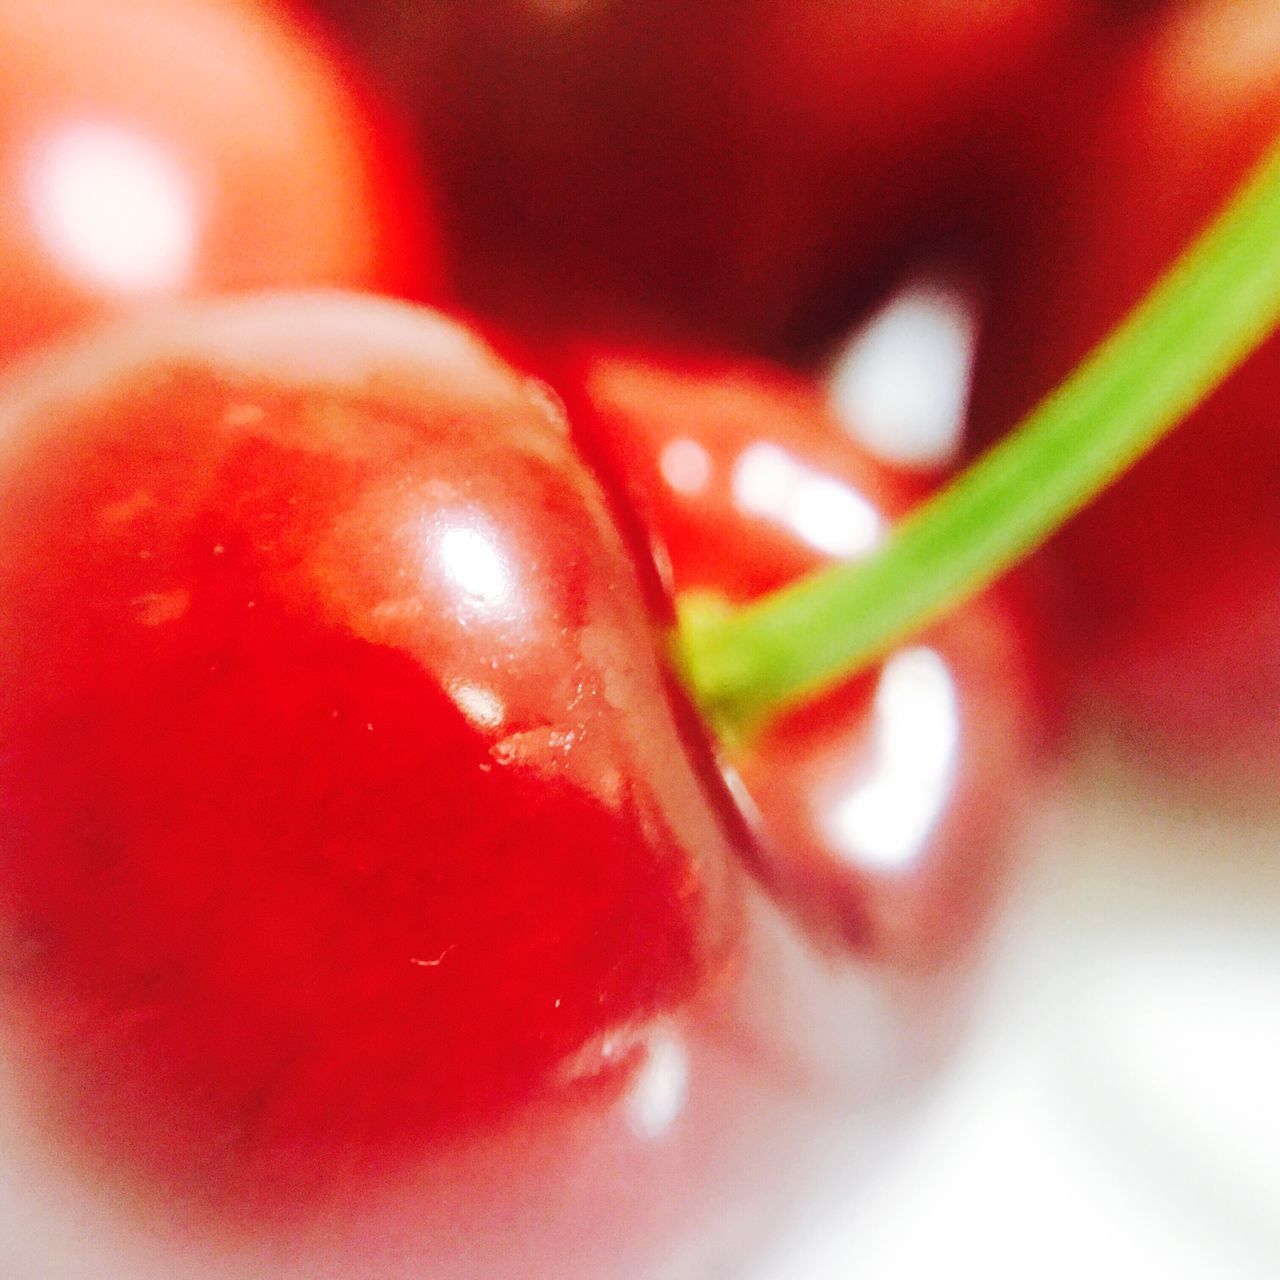 red, close-up, food and drink, indoors, food, no people, freshness, day